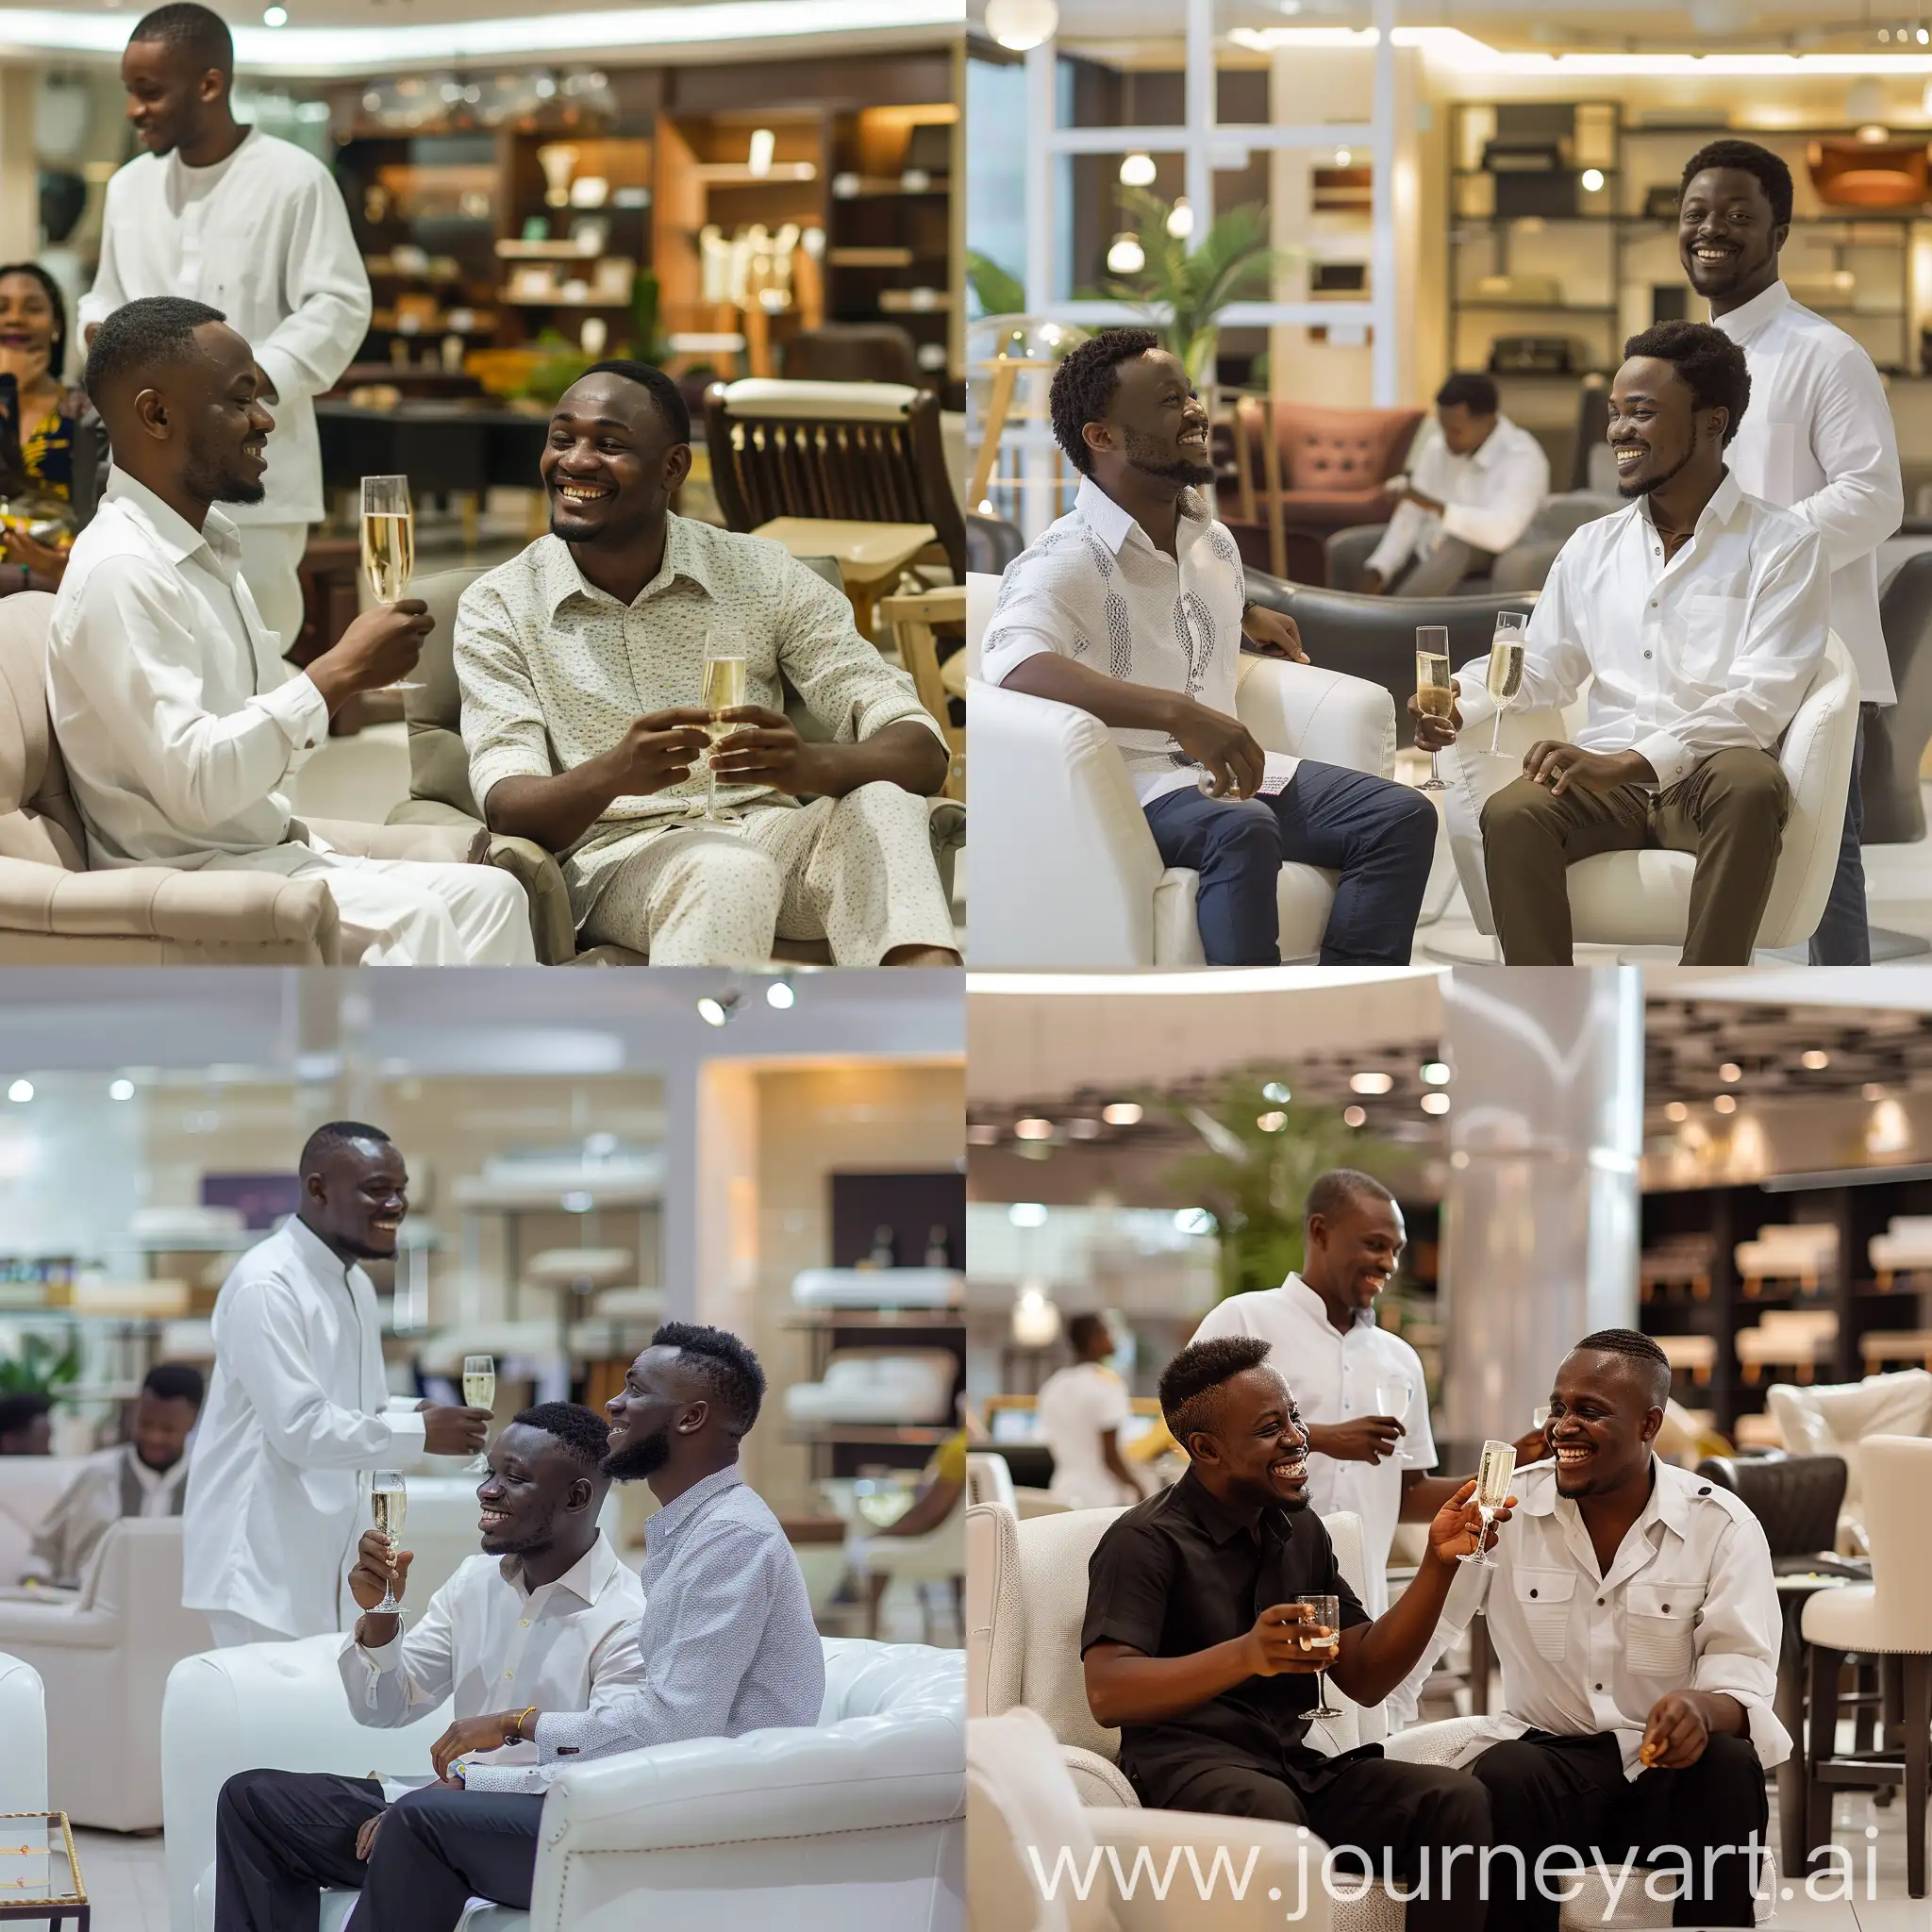 
"A realistic image for International Friendship Day and a Design Furniture Store:
Celebrate friendship and harmony in design, featuring two African male friends seated, enjoying a glass of champagne, smiling as they celebrate friendship, and engaging in conversation in a furniture store, with furniture prominently displayed. Another man, dressed in a white uniform, is seen assisting them with furniture purchases.